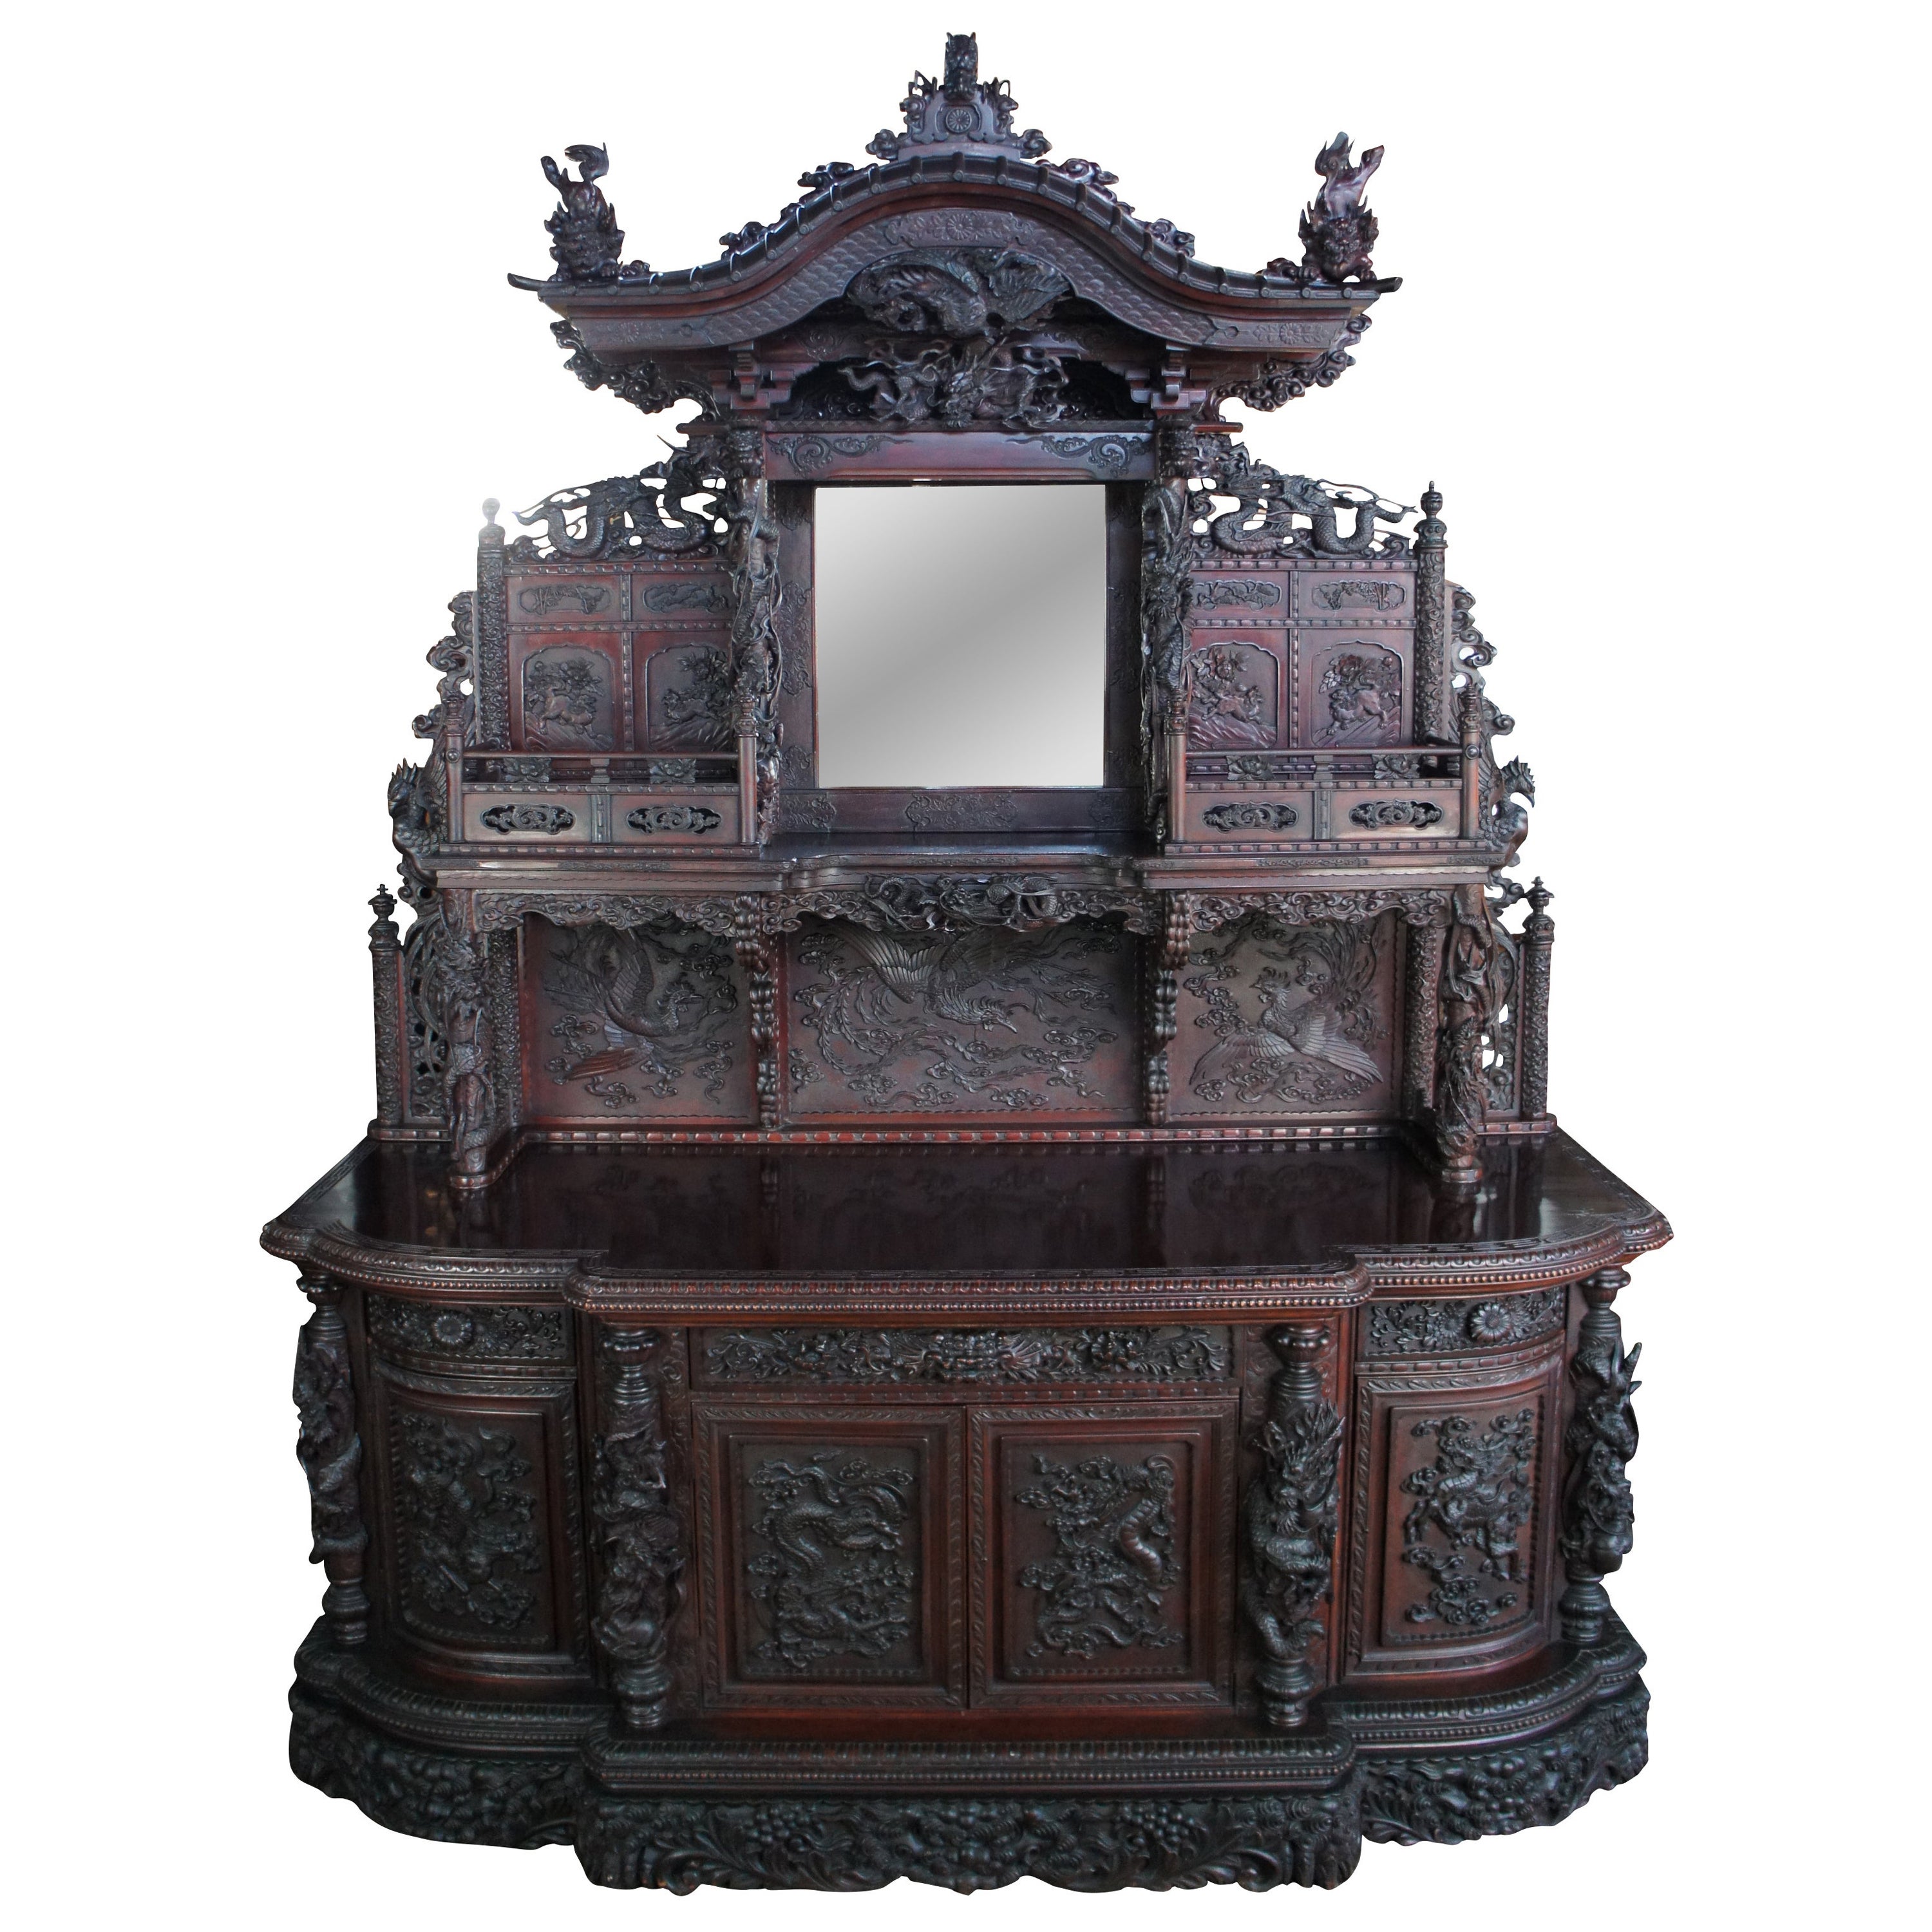 Rare Antique Monumental Japanese Imperial Carved Elm Altar Sideboard Console For Sale